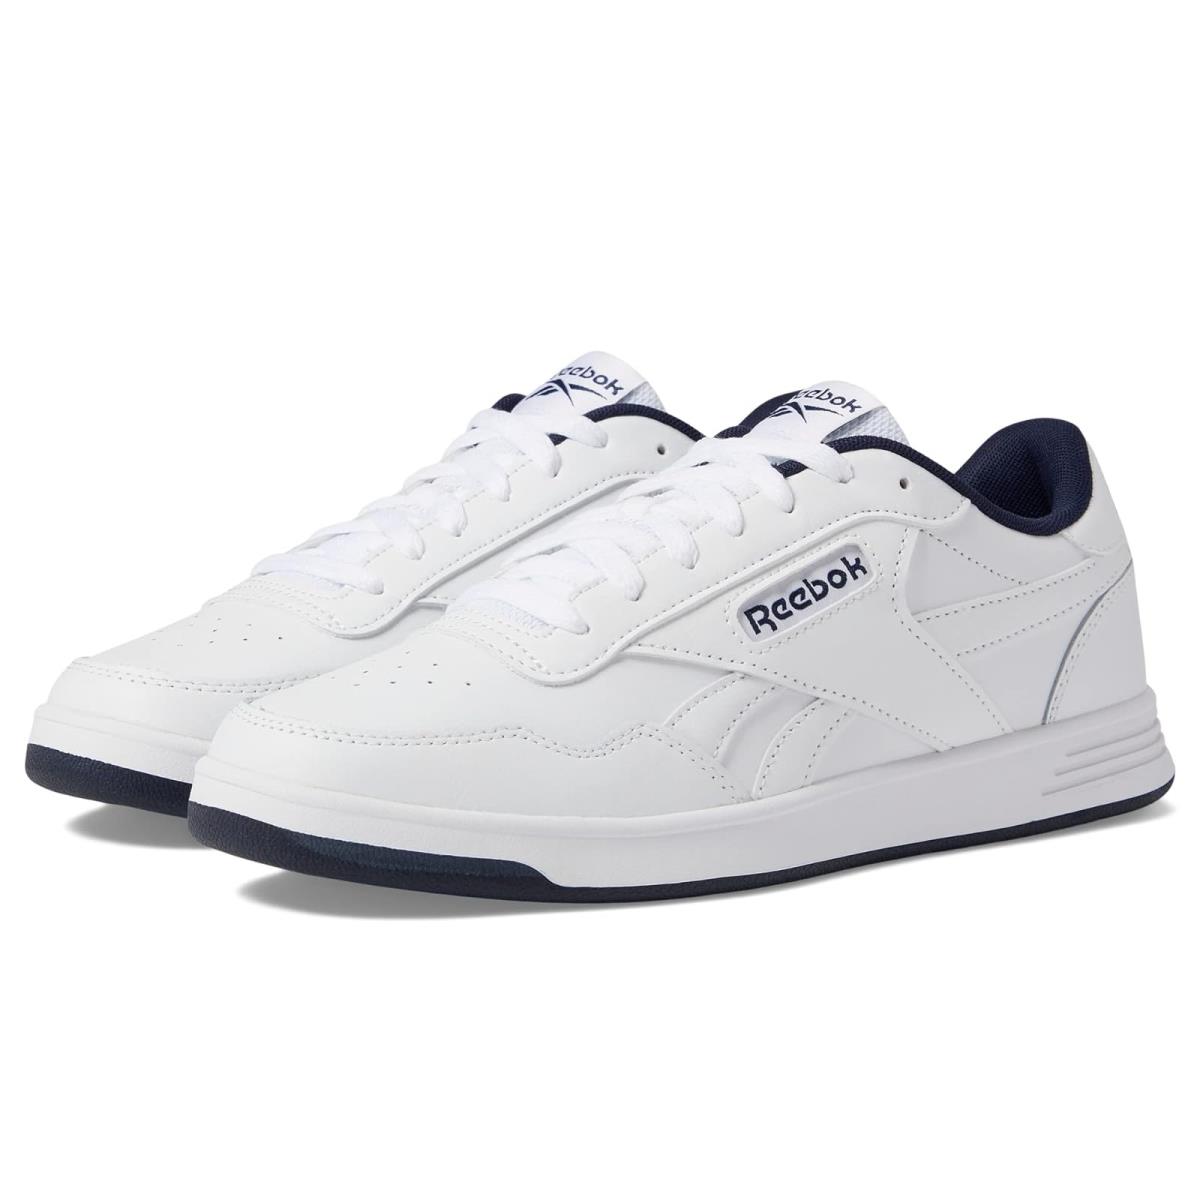 Unisex Sneakers Athletic Shoes Reebok Court Advance White/Vector Navy